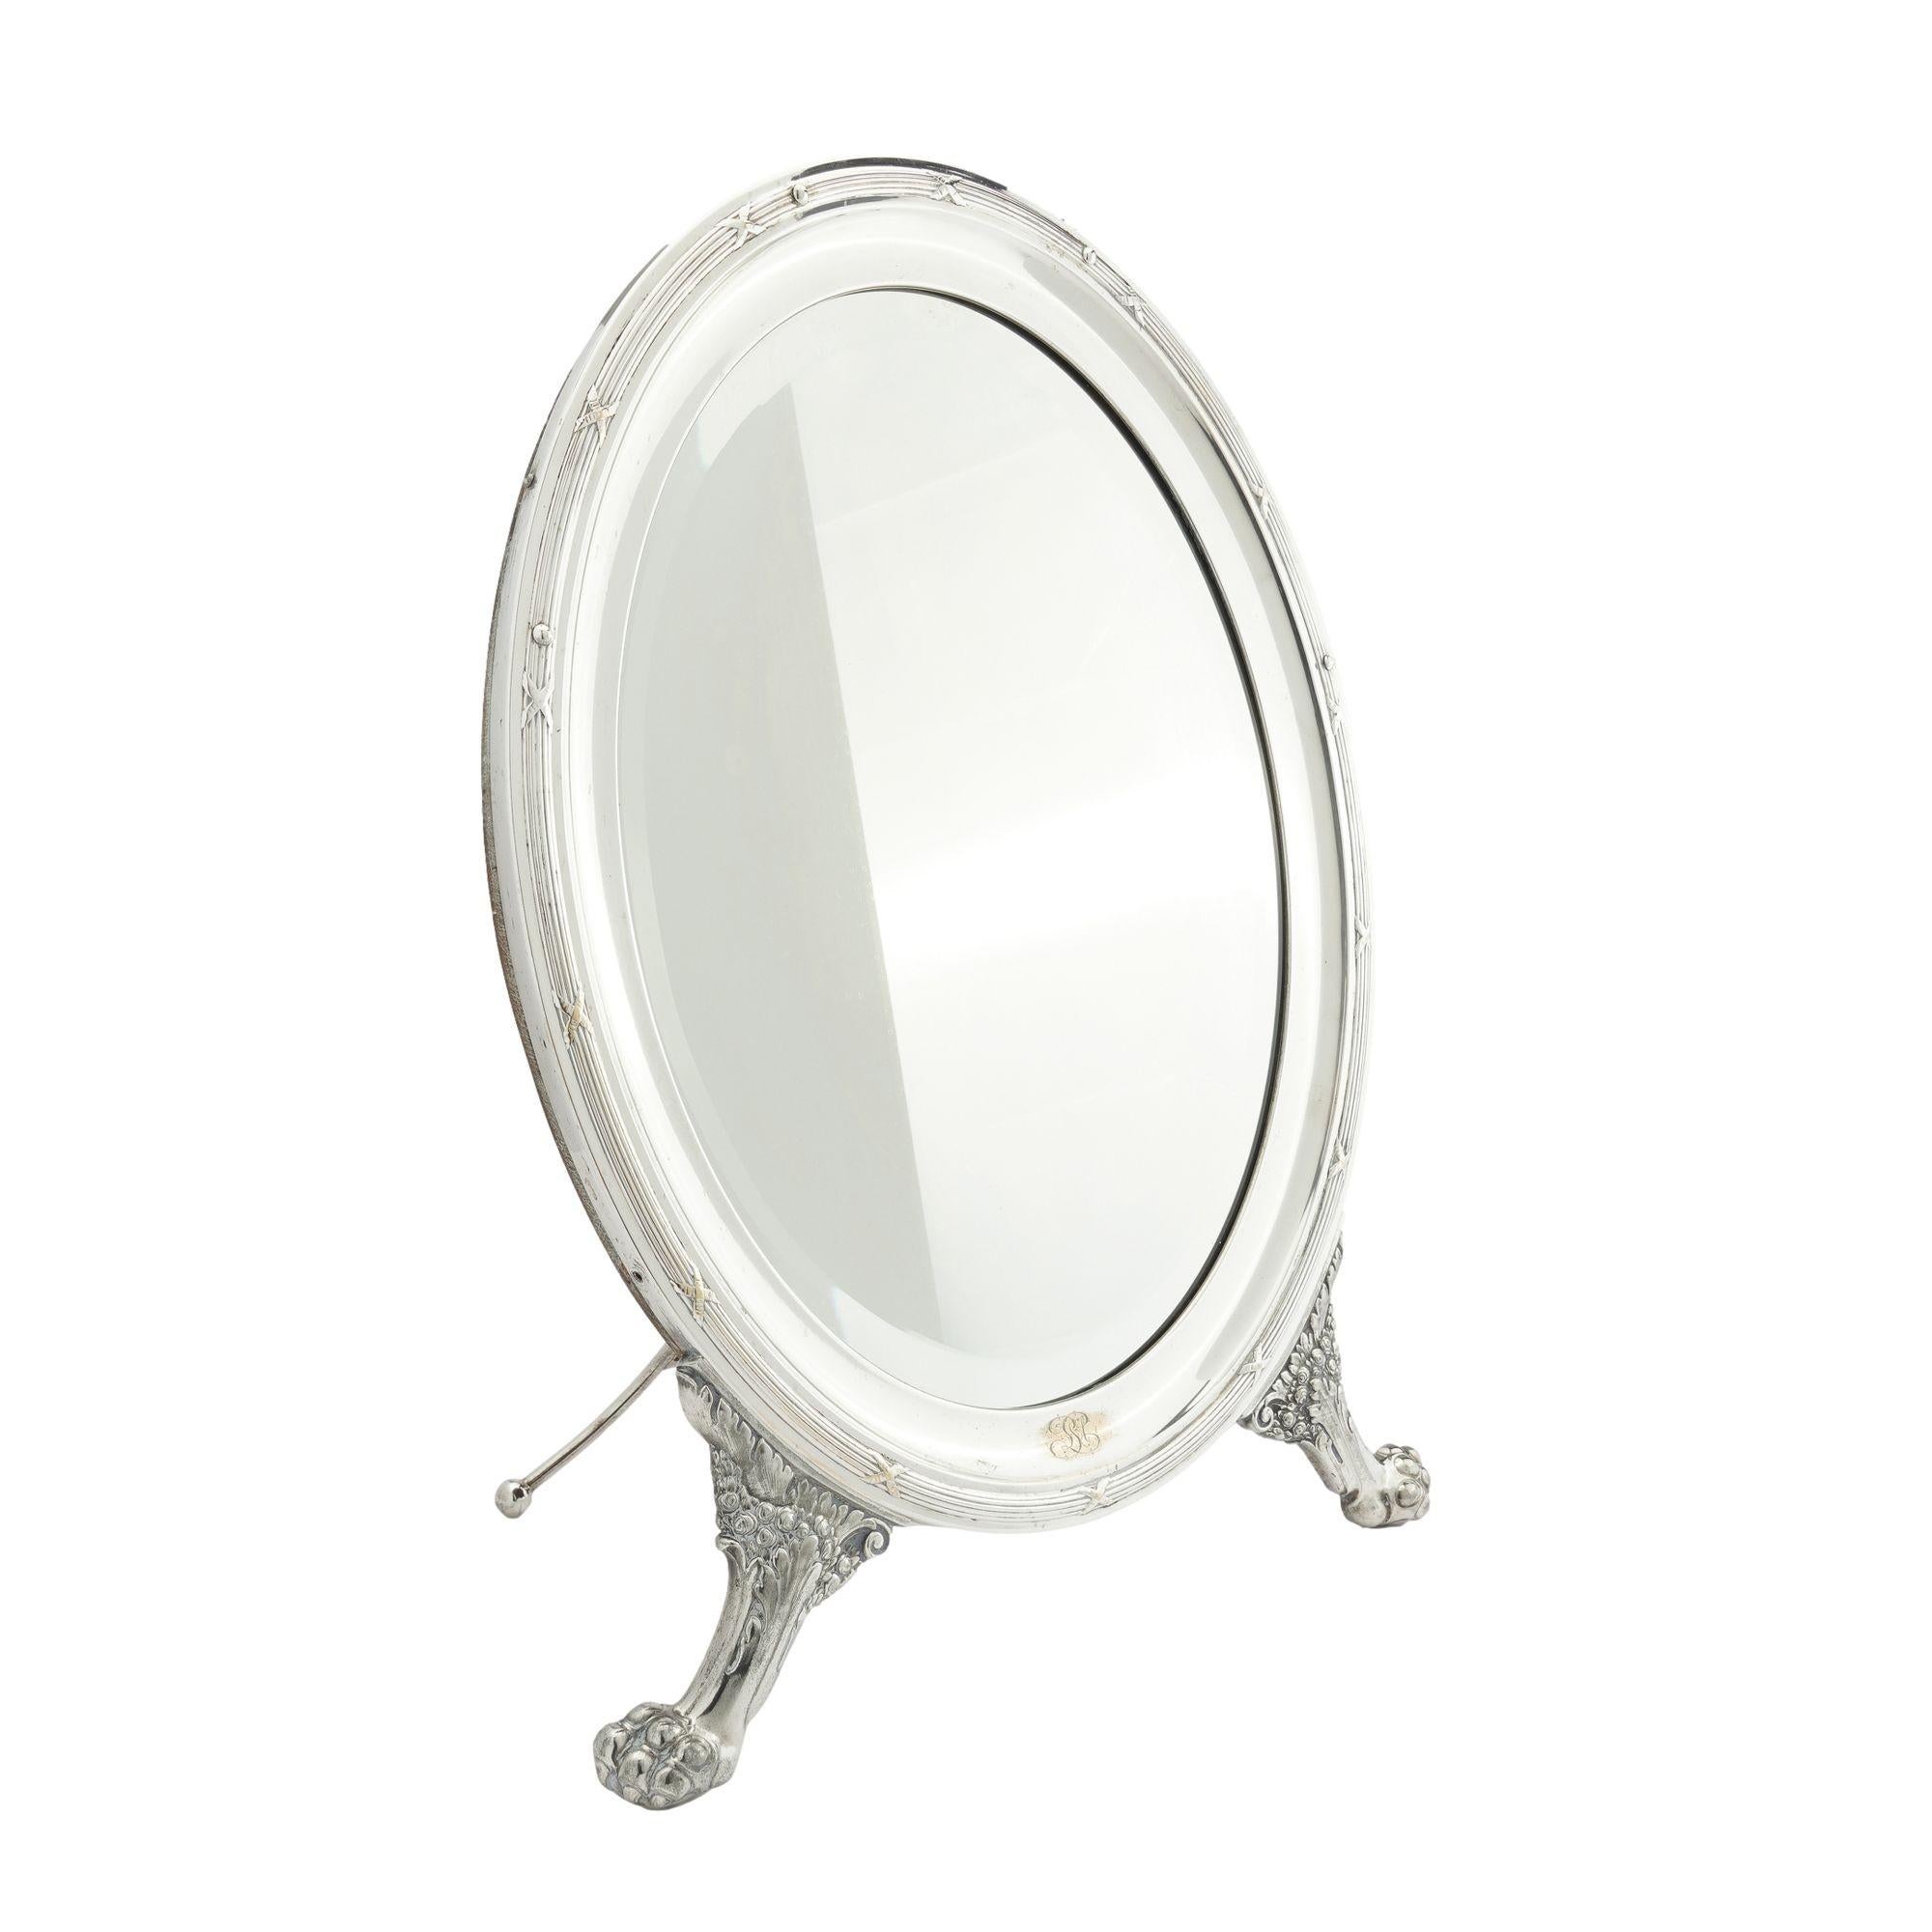 Oval easel back dressing mirror attributed to the Norblin Metal Works, 1880-1900 3